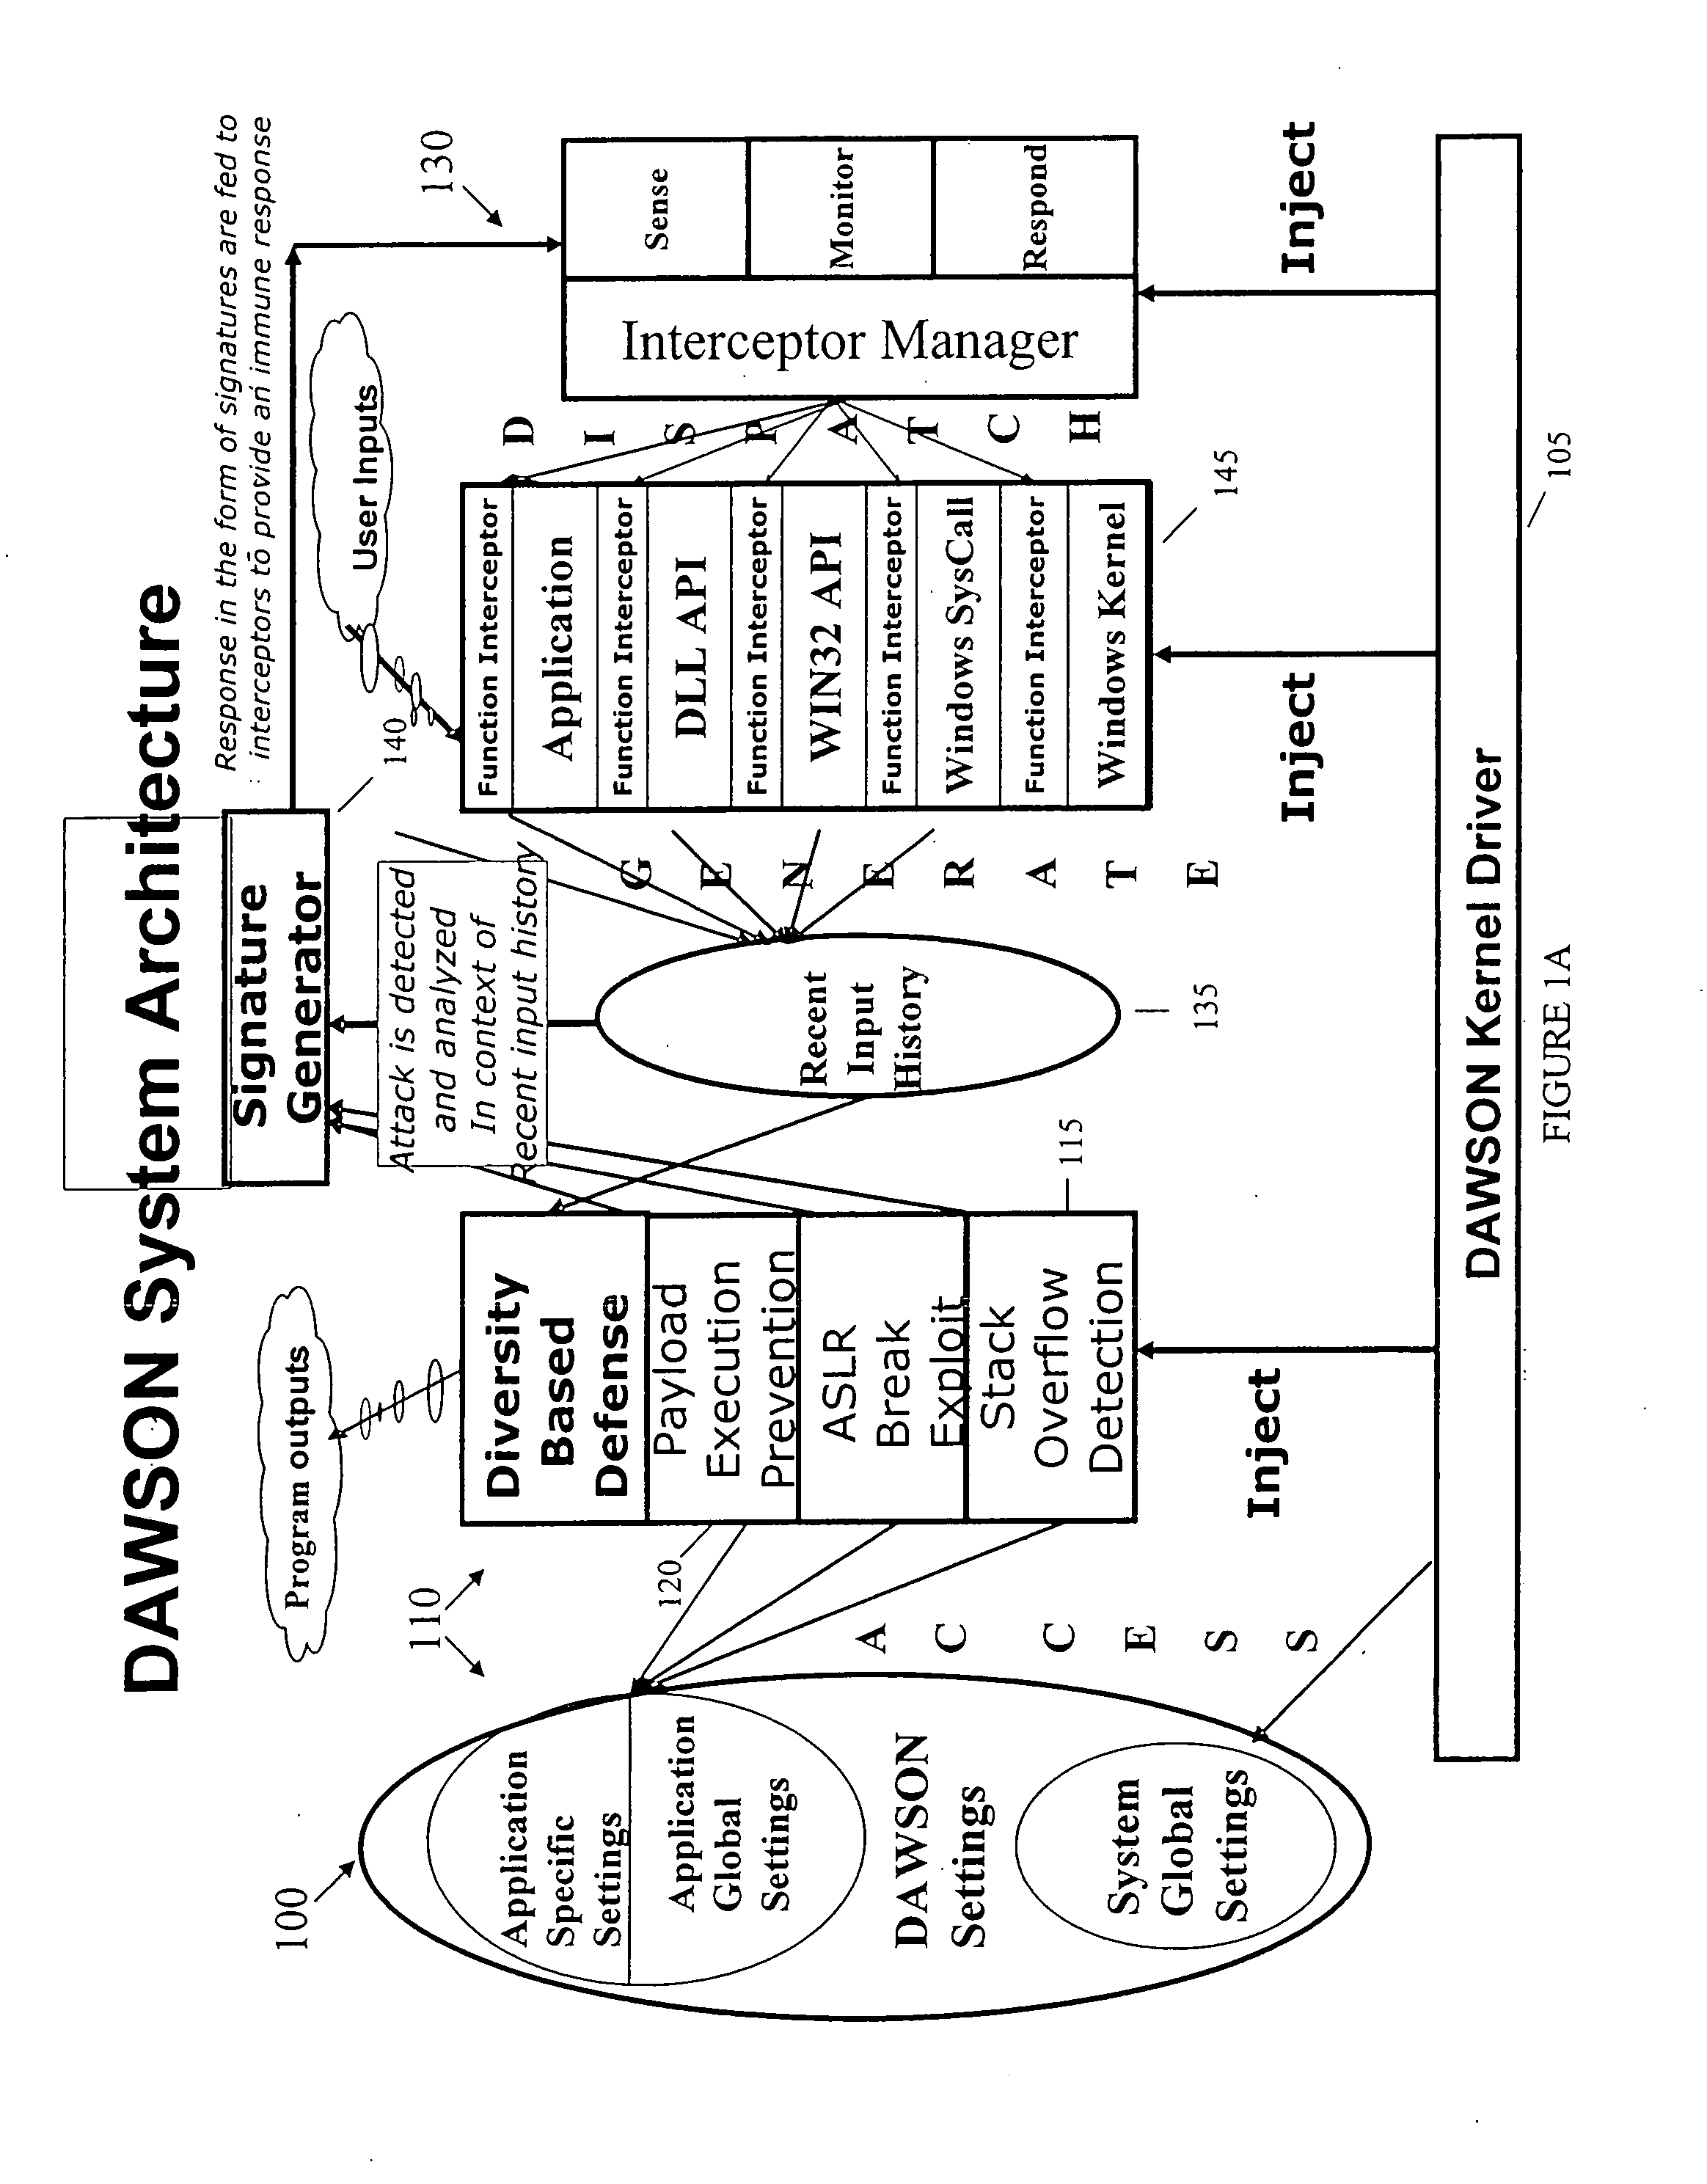 Diversity-based security system and method